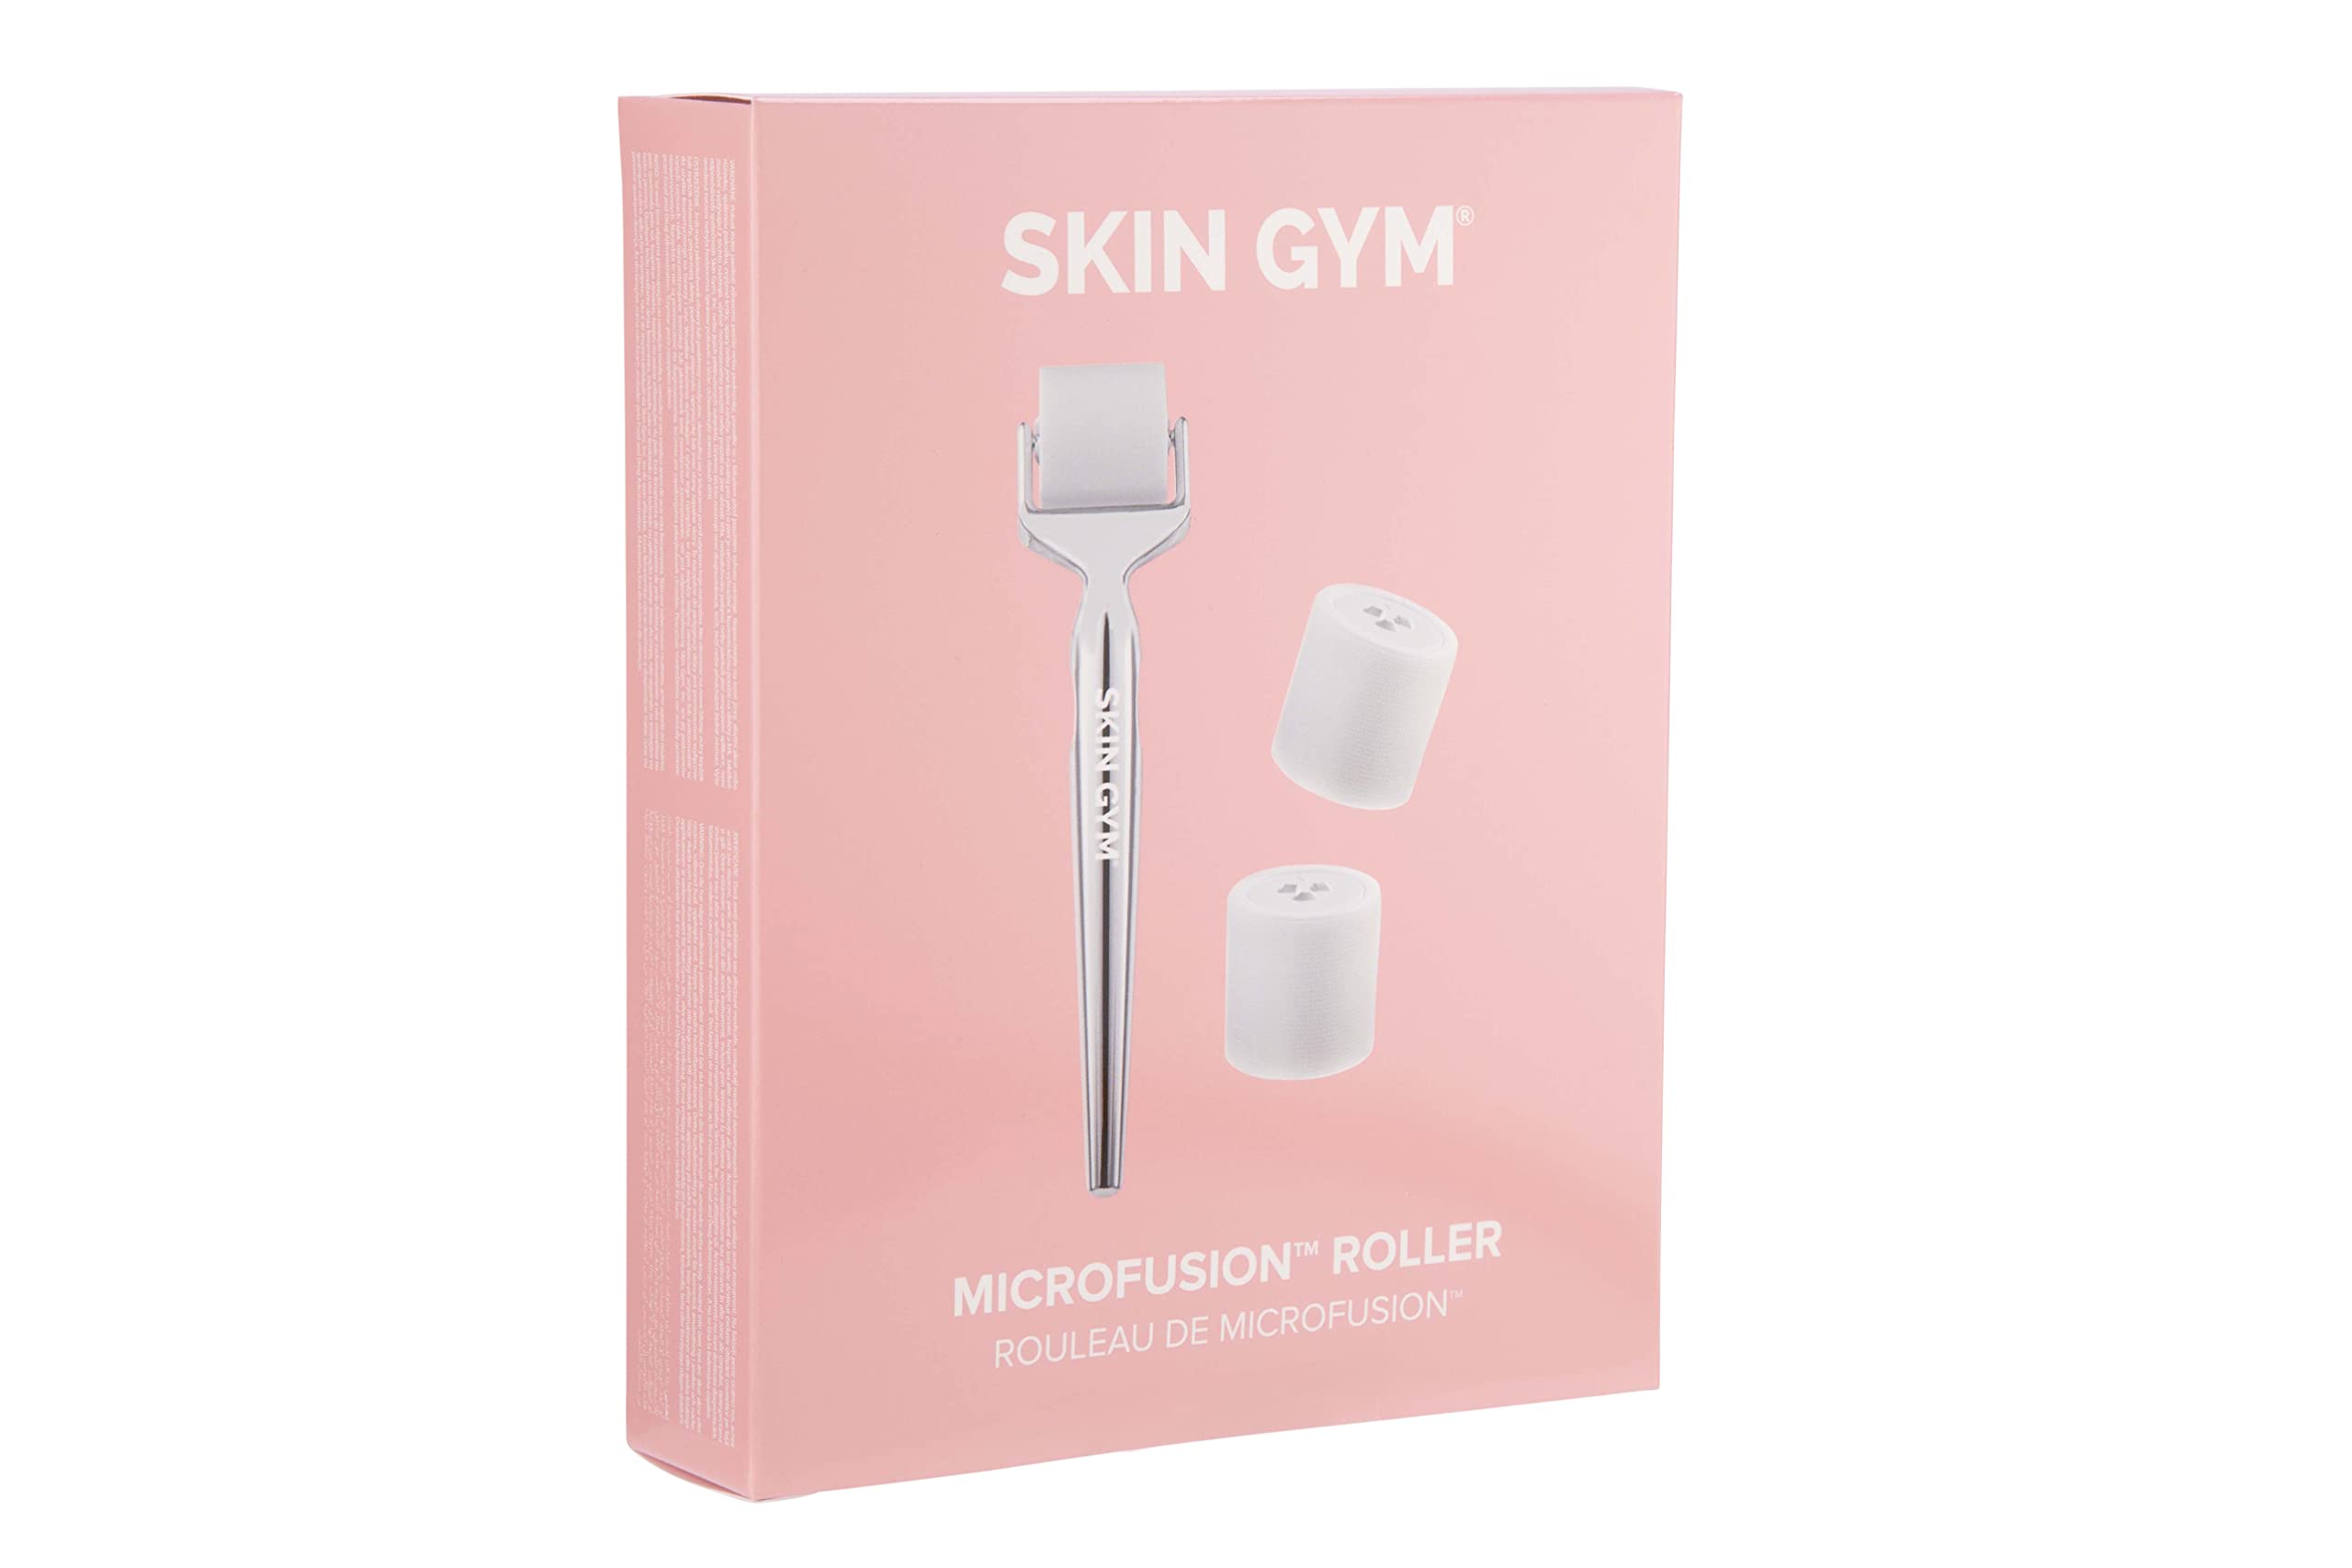 SKIN GYM Microfusion Dissolving Hyaluronic Roller, Non-Invasive Microneedling Alternative, 3000+ Hyaluronic Acid & Peptide Tips for Smooth, Supple, Youthful Skin, Includes 1 Tool + 3 Roller Heads